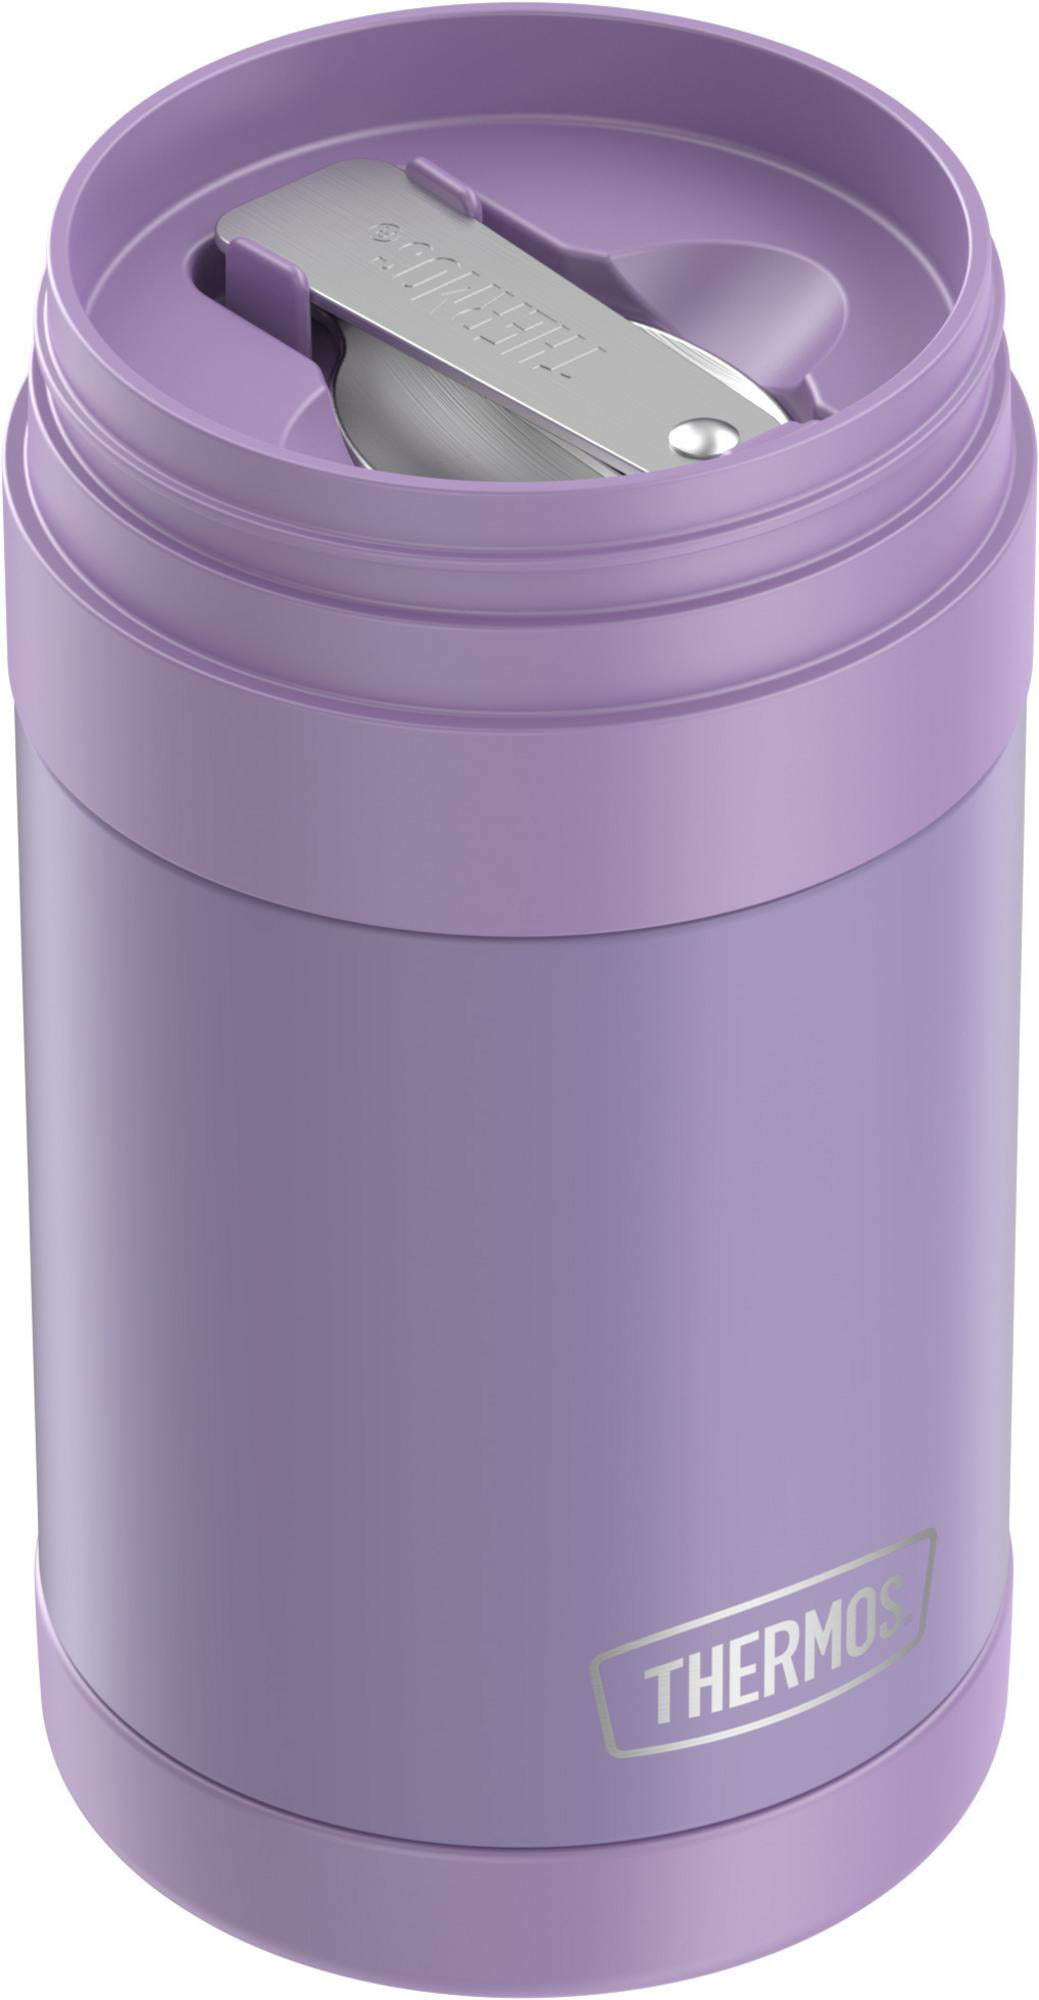 Charcy 9oz Kids Thermo for Hot Food - Insulated Food Jar for Hot & Cold  Food - Flat Lid Purple Mermaid